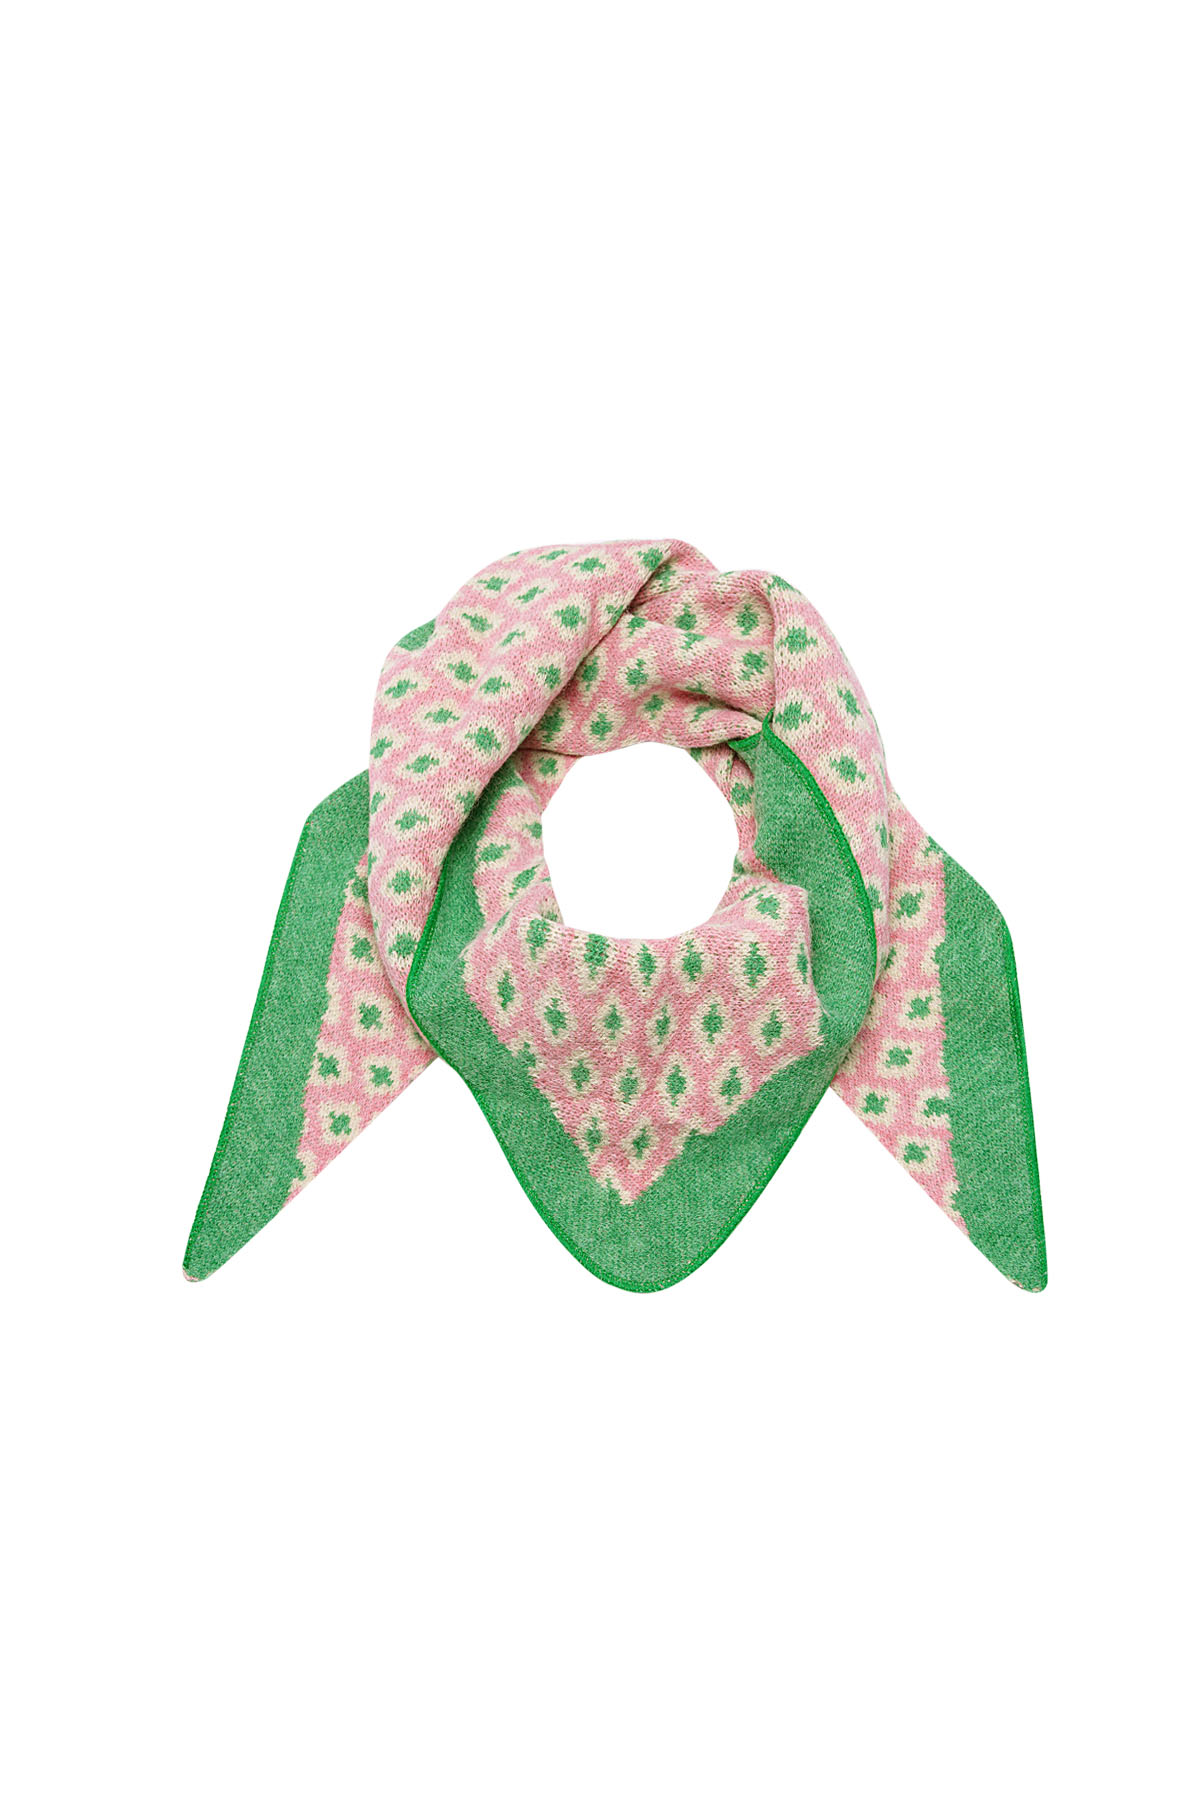 Autumn/winter printed scarf - pink and green 